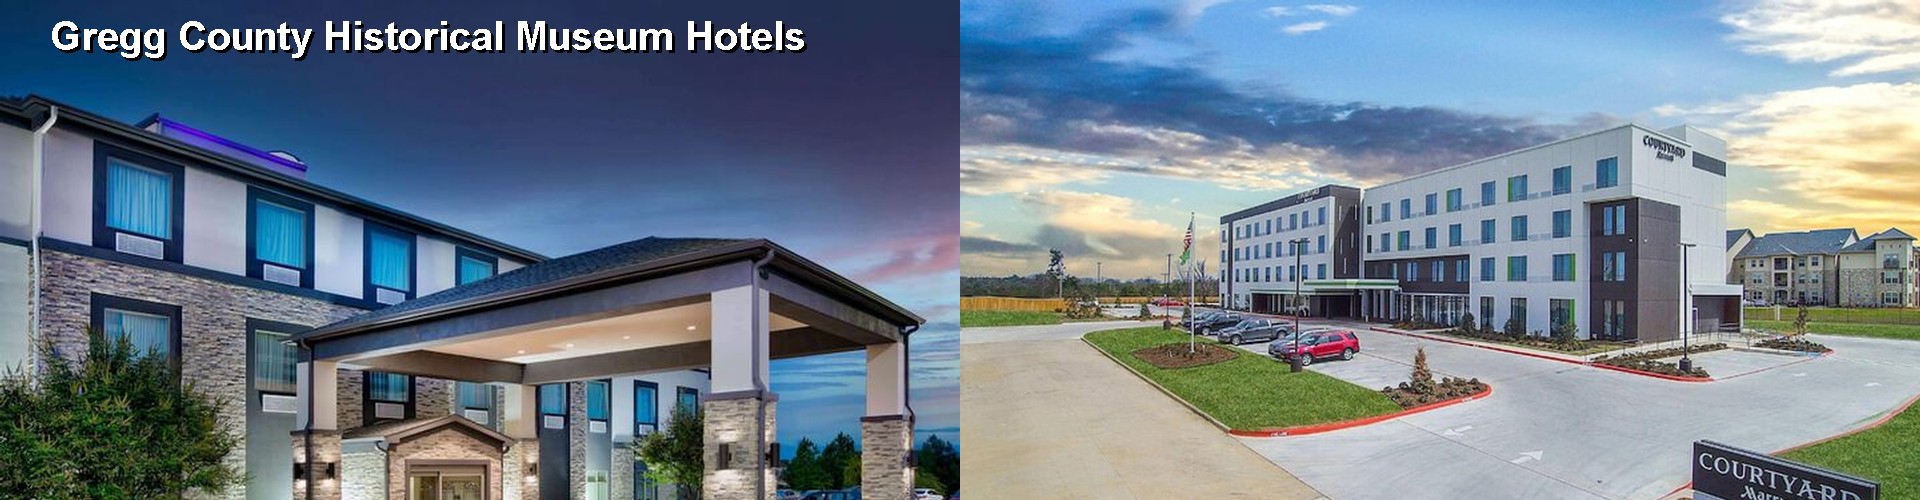 4 Best Hotels near Gregg County Historical Museum